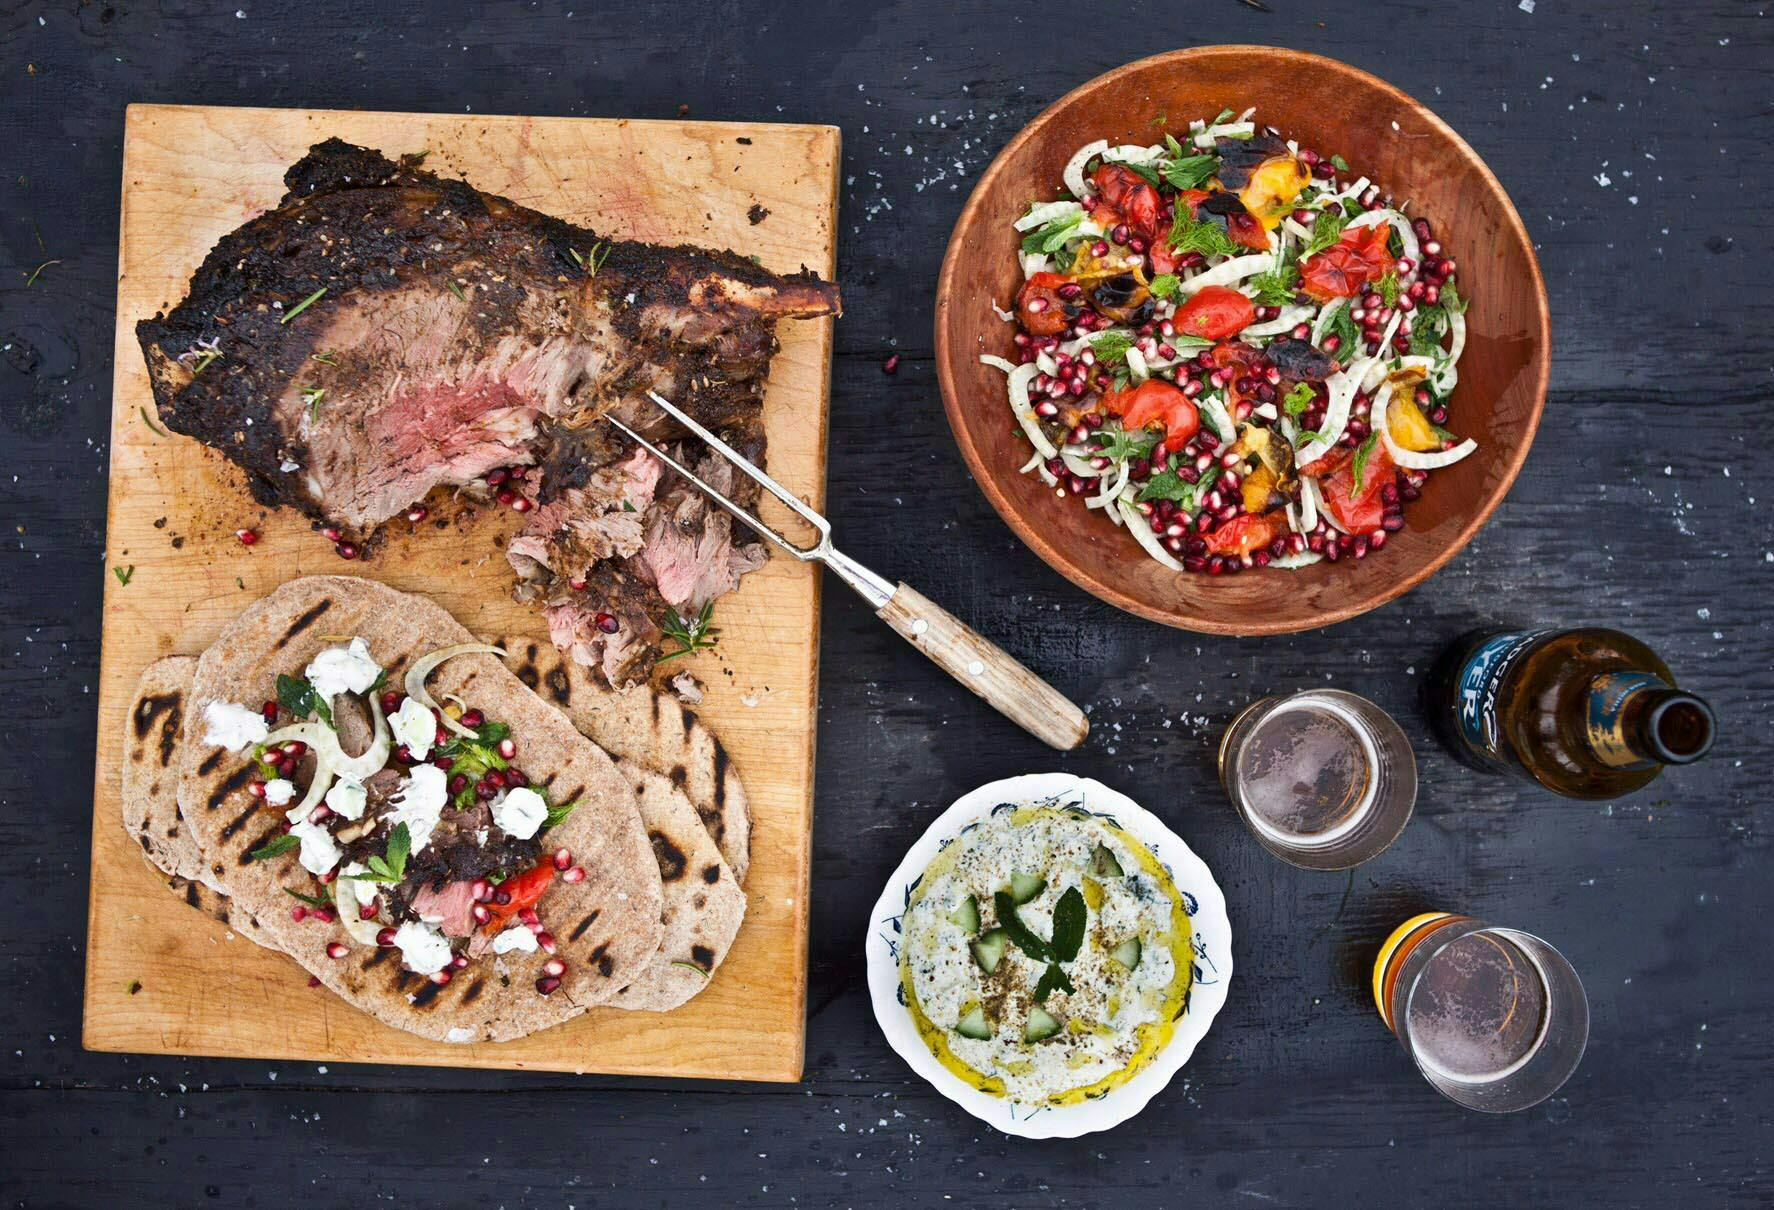 This roast lamb & gin recipe is going to make your weekend